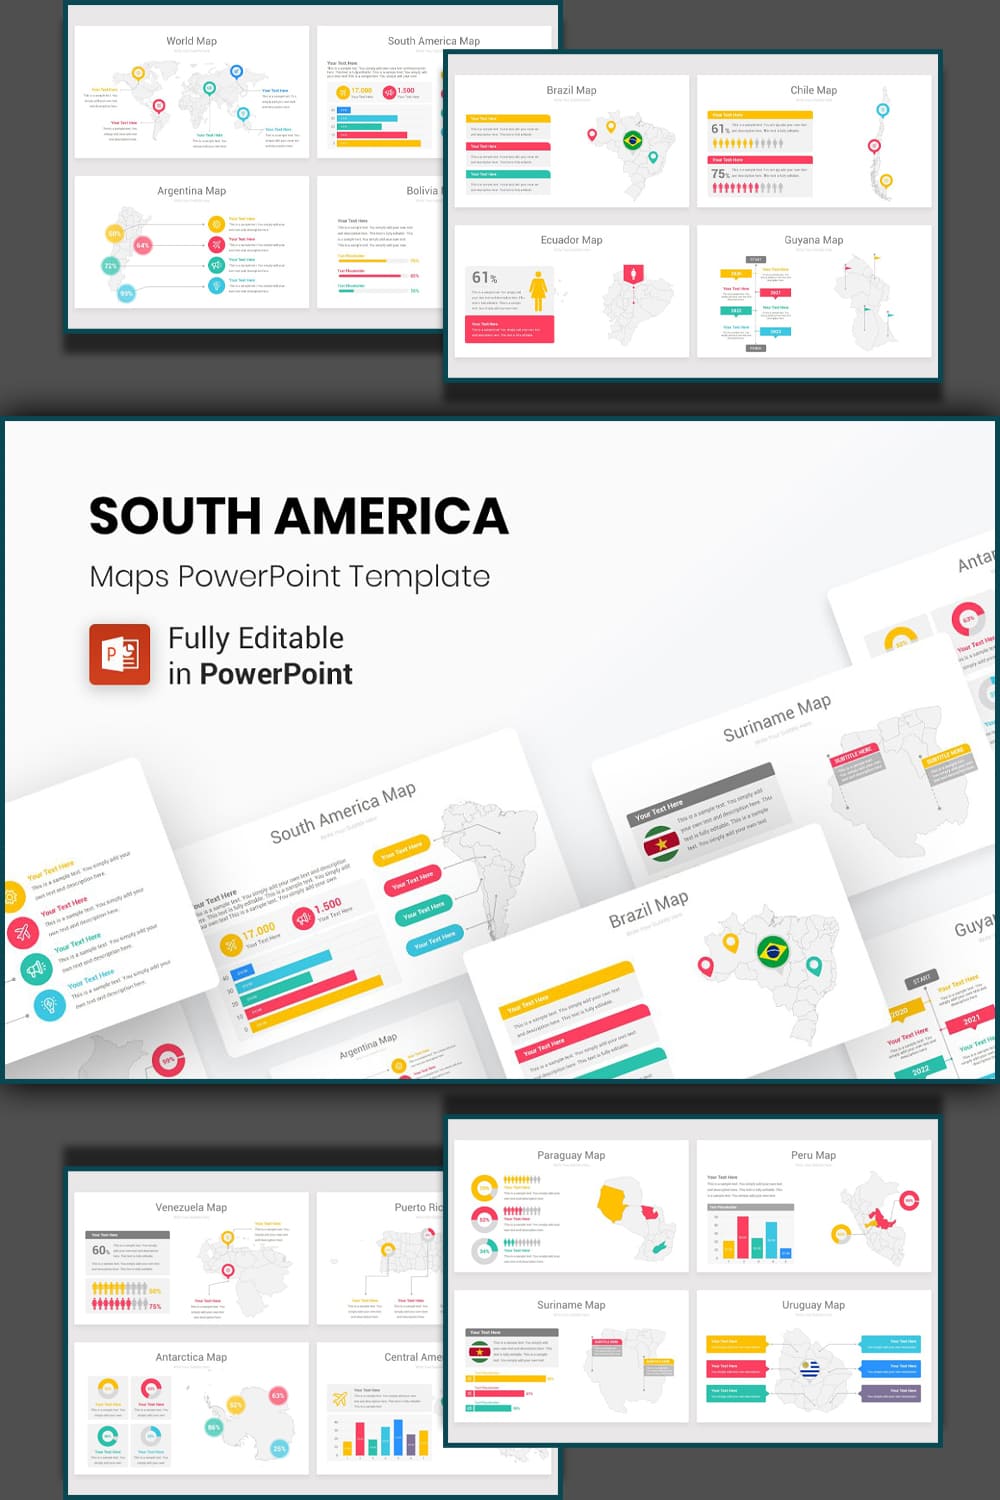 South America Maps PowerPoint Template pinterest image.